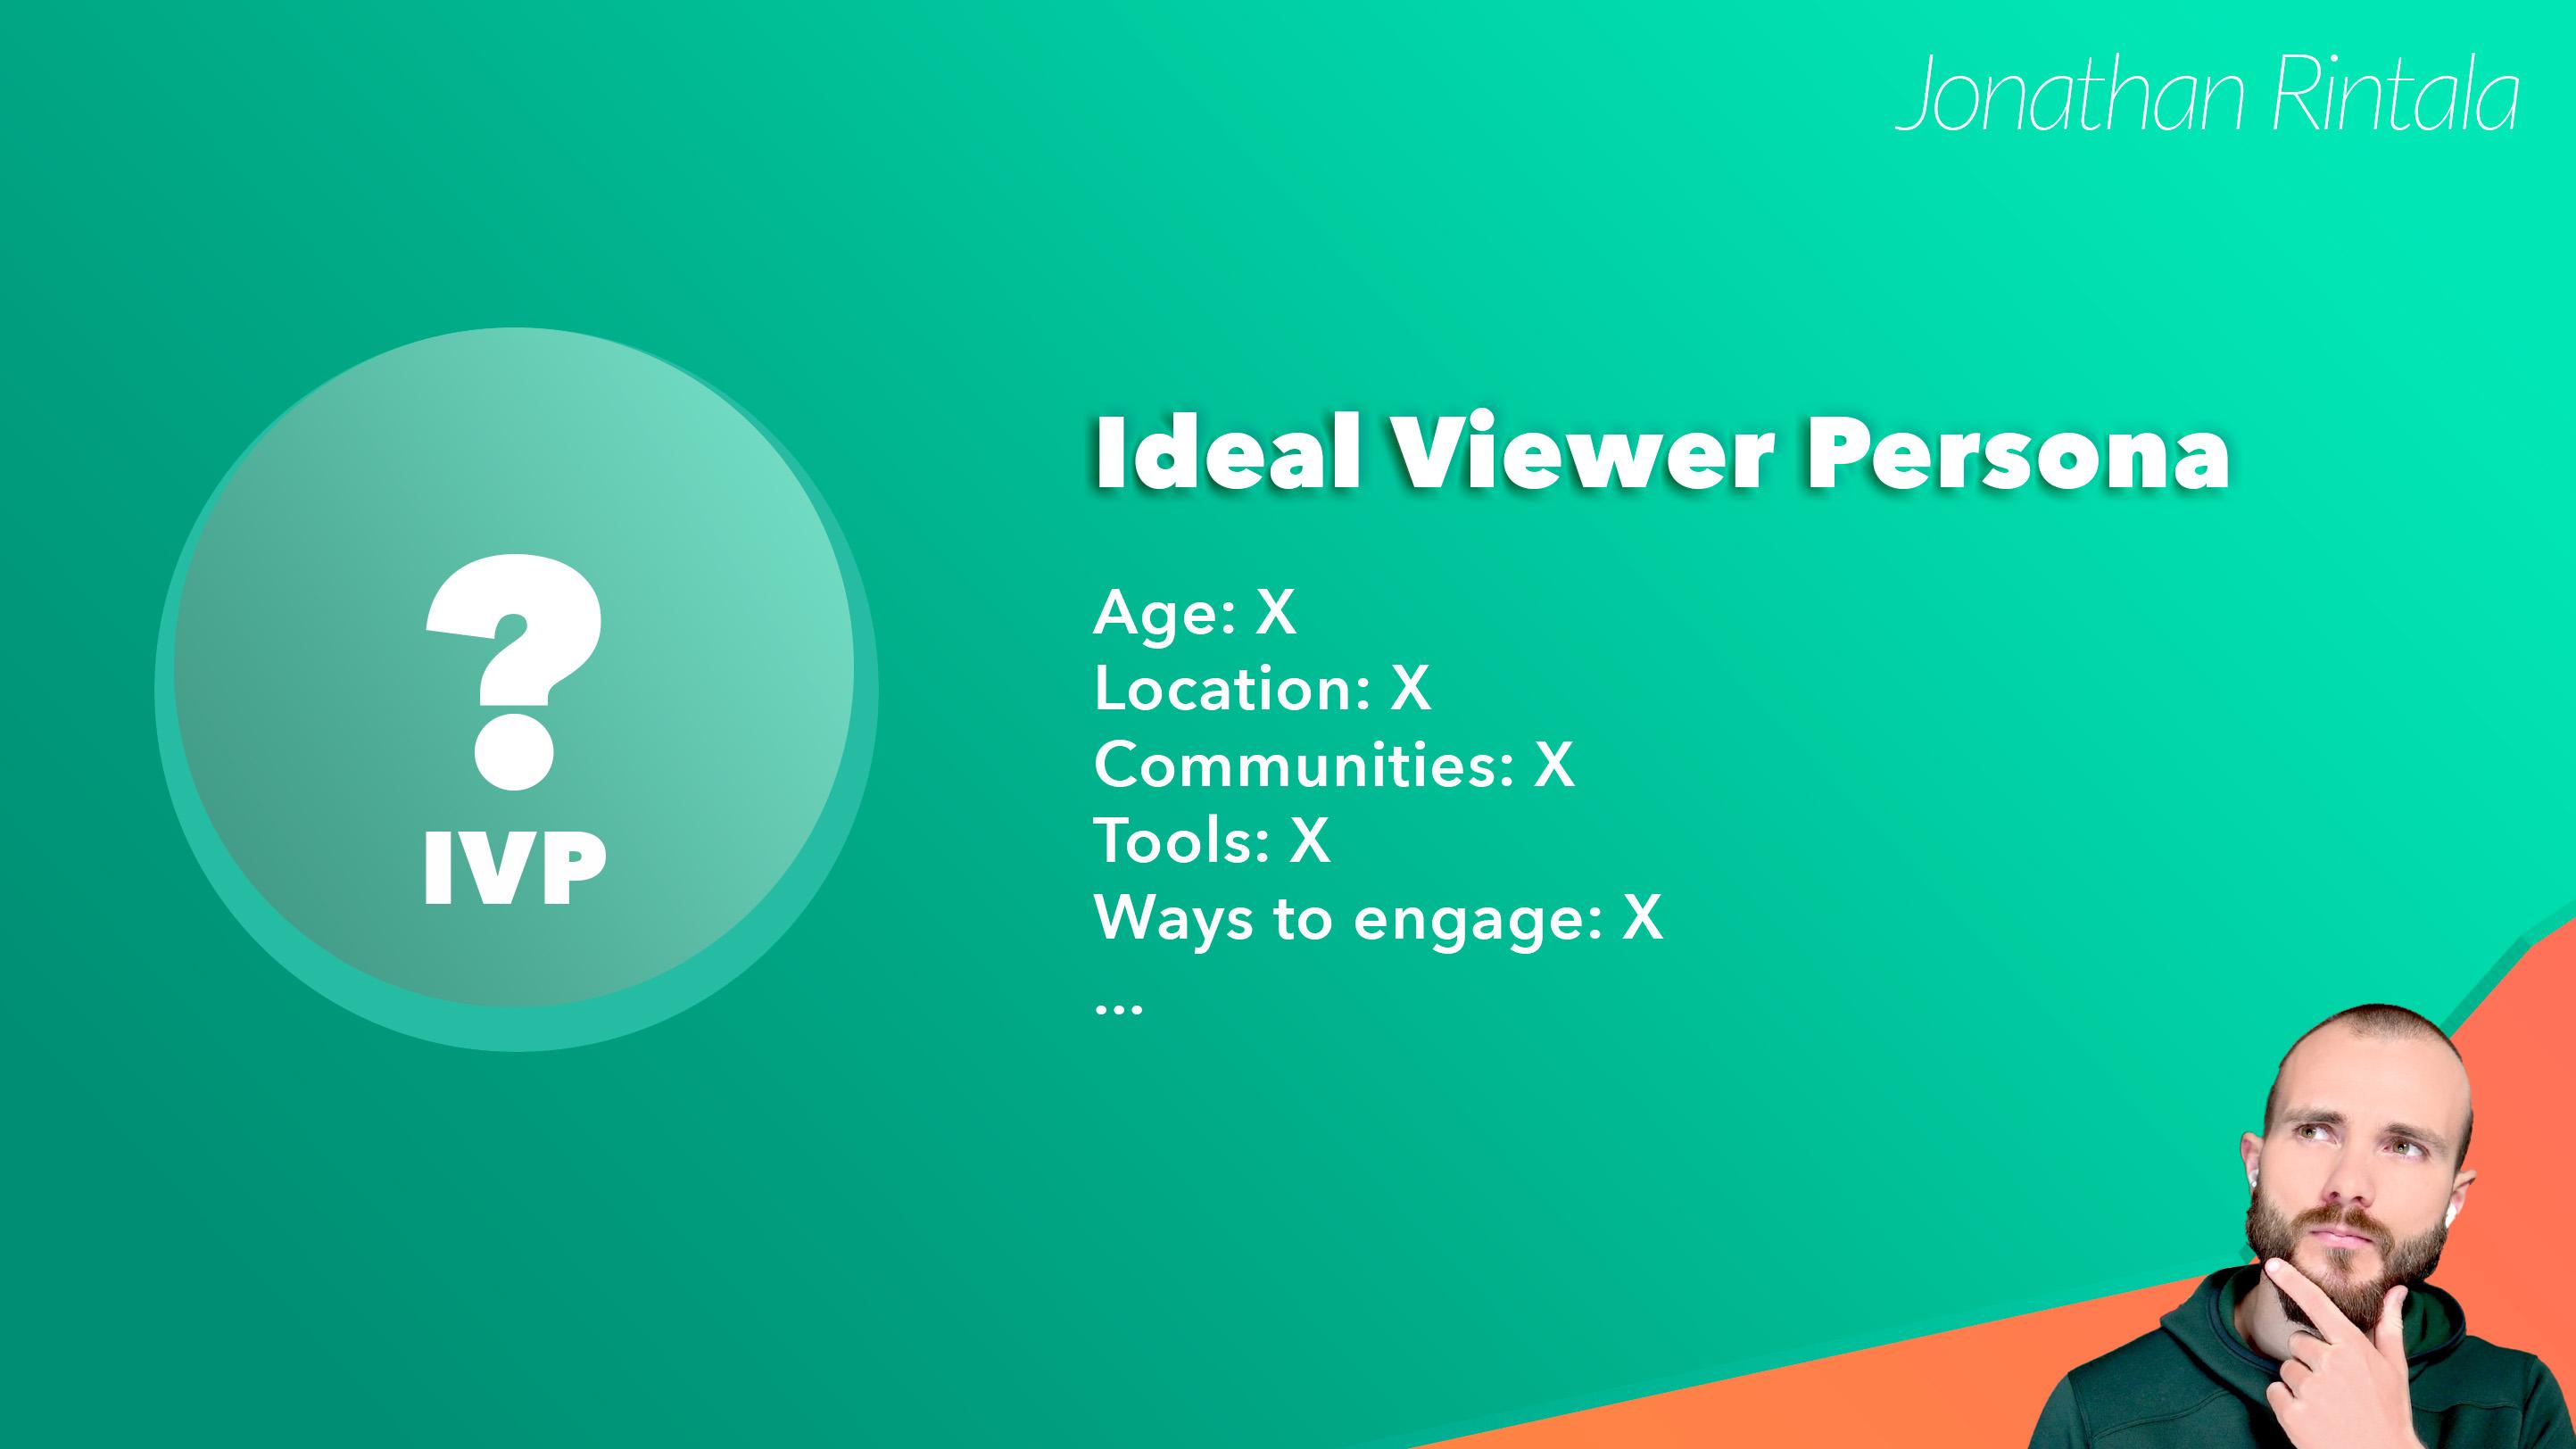 Ideal Viewer Persona (IVP)